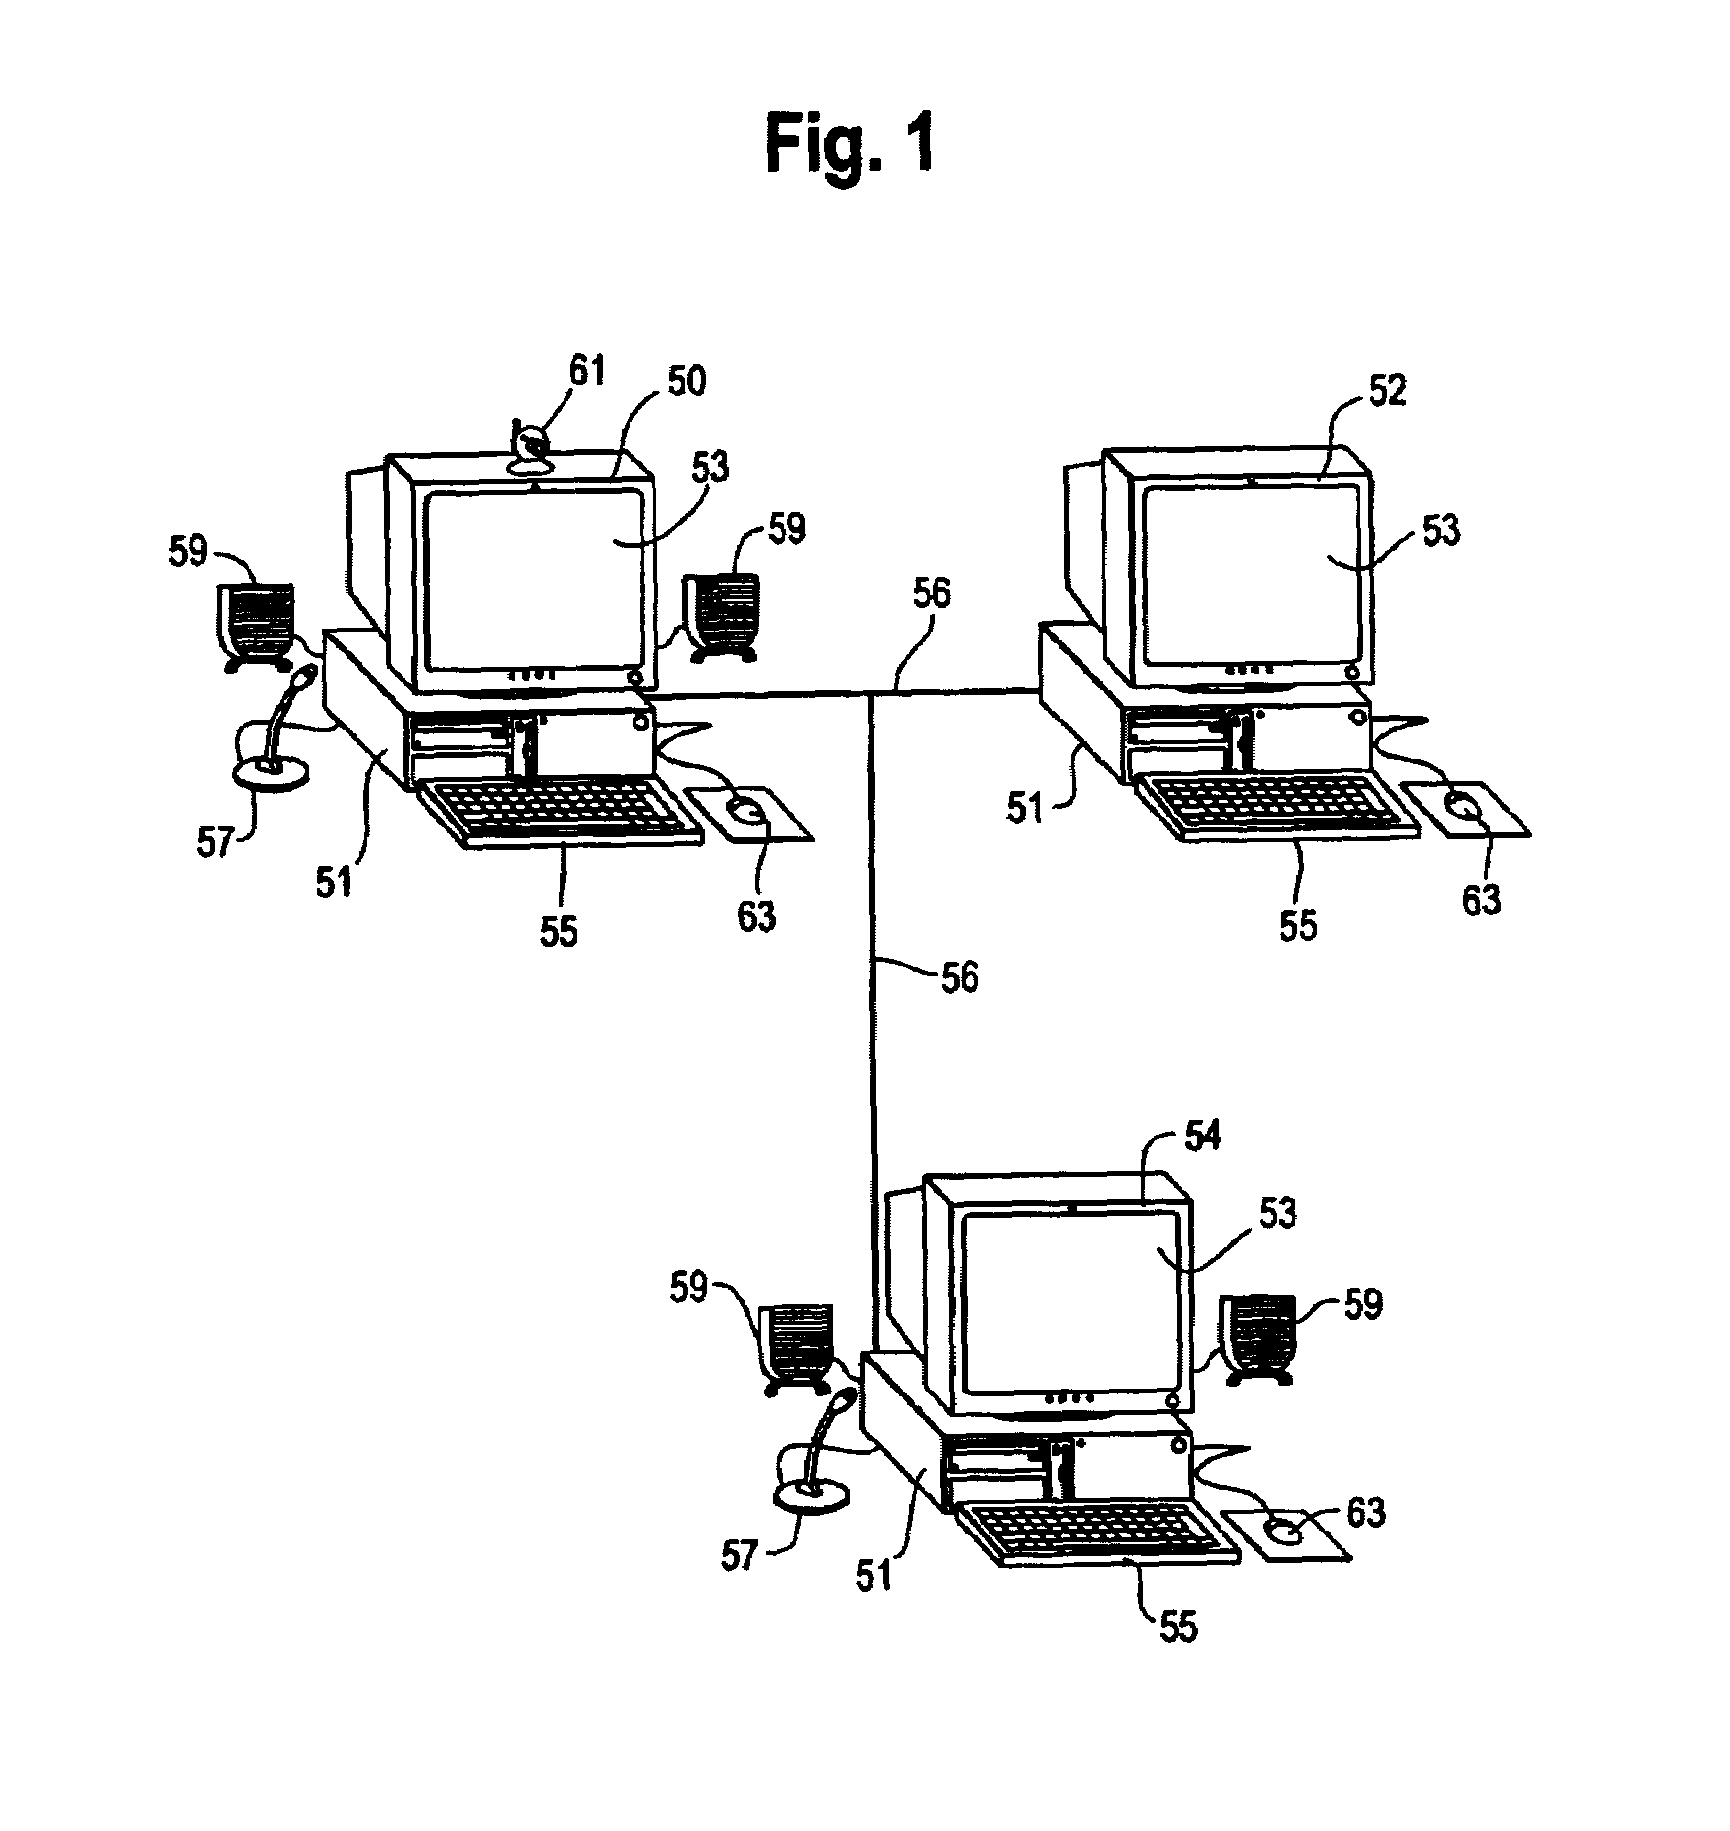 Automated system and method for conducting usability testing